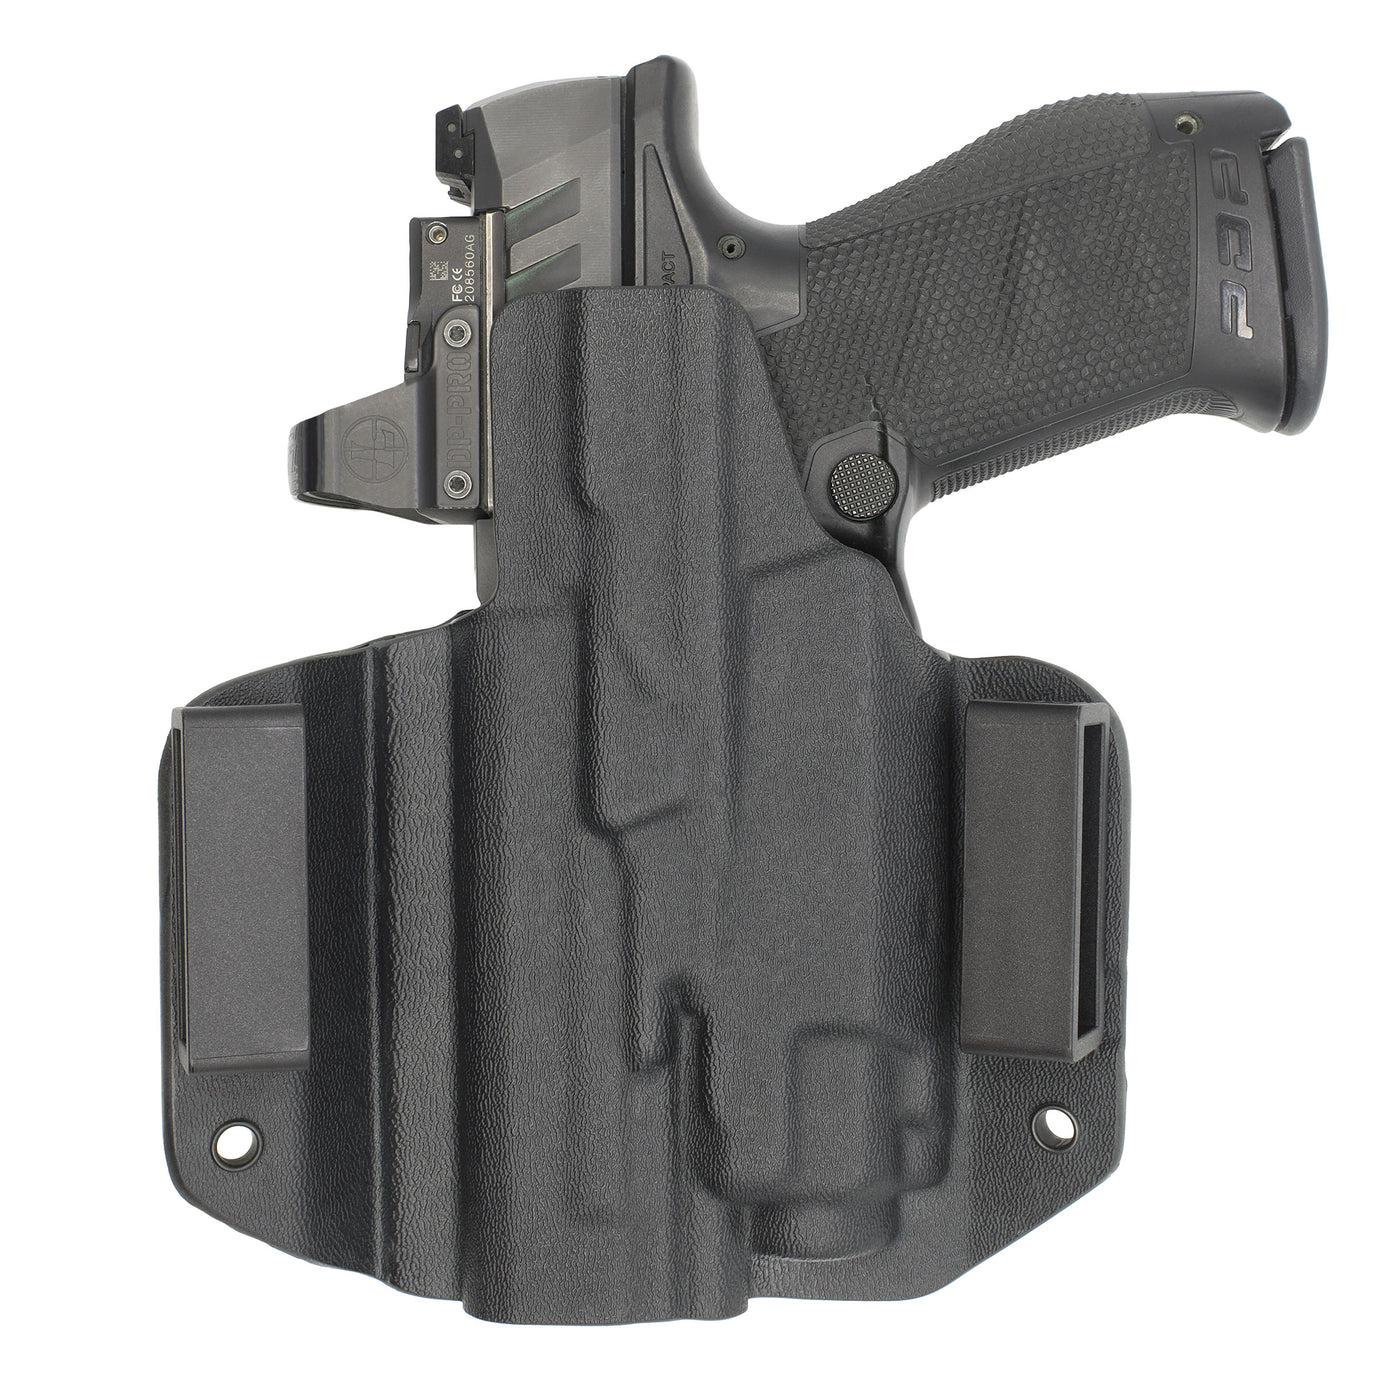 C&G Holsters quickship OWB tactical Walther PDP streamlight TLR8 holstered back view